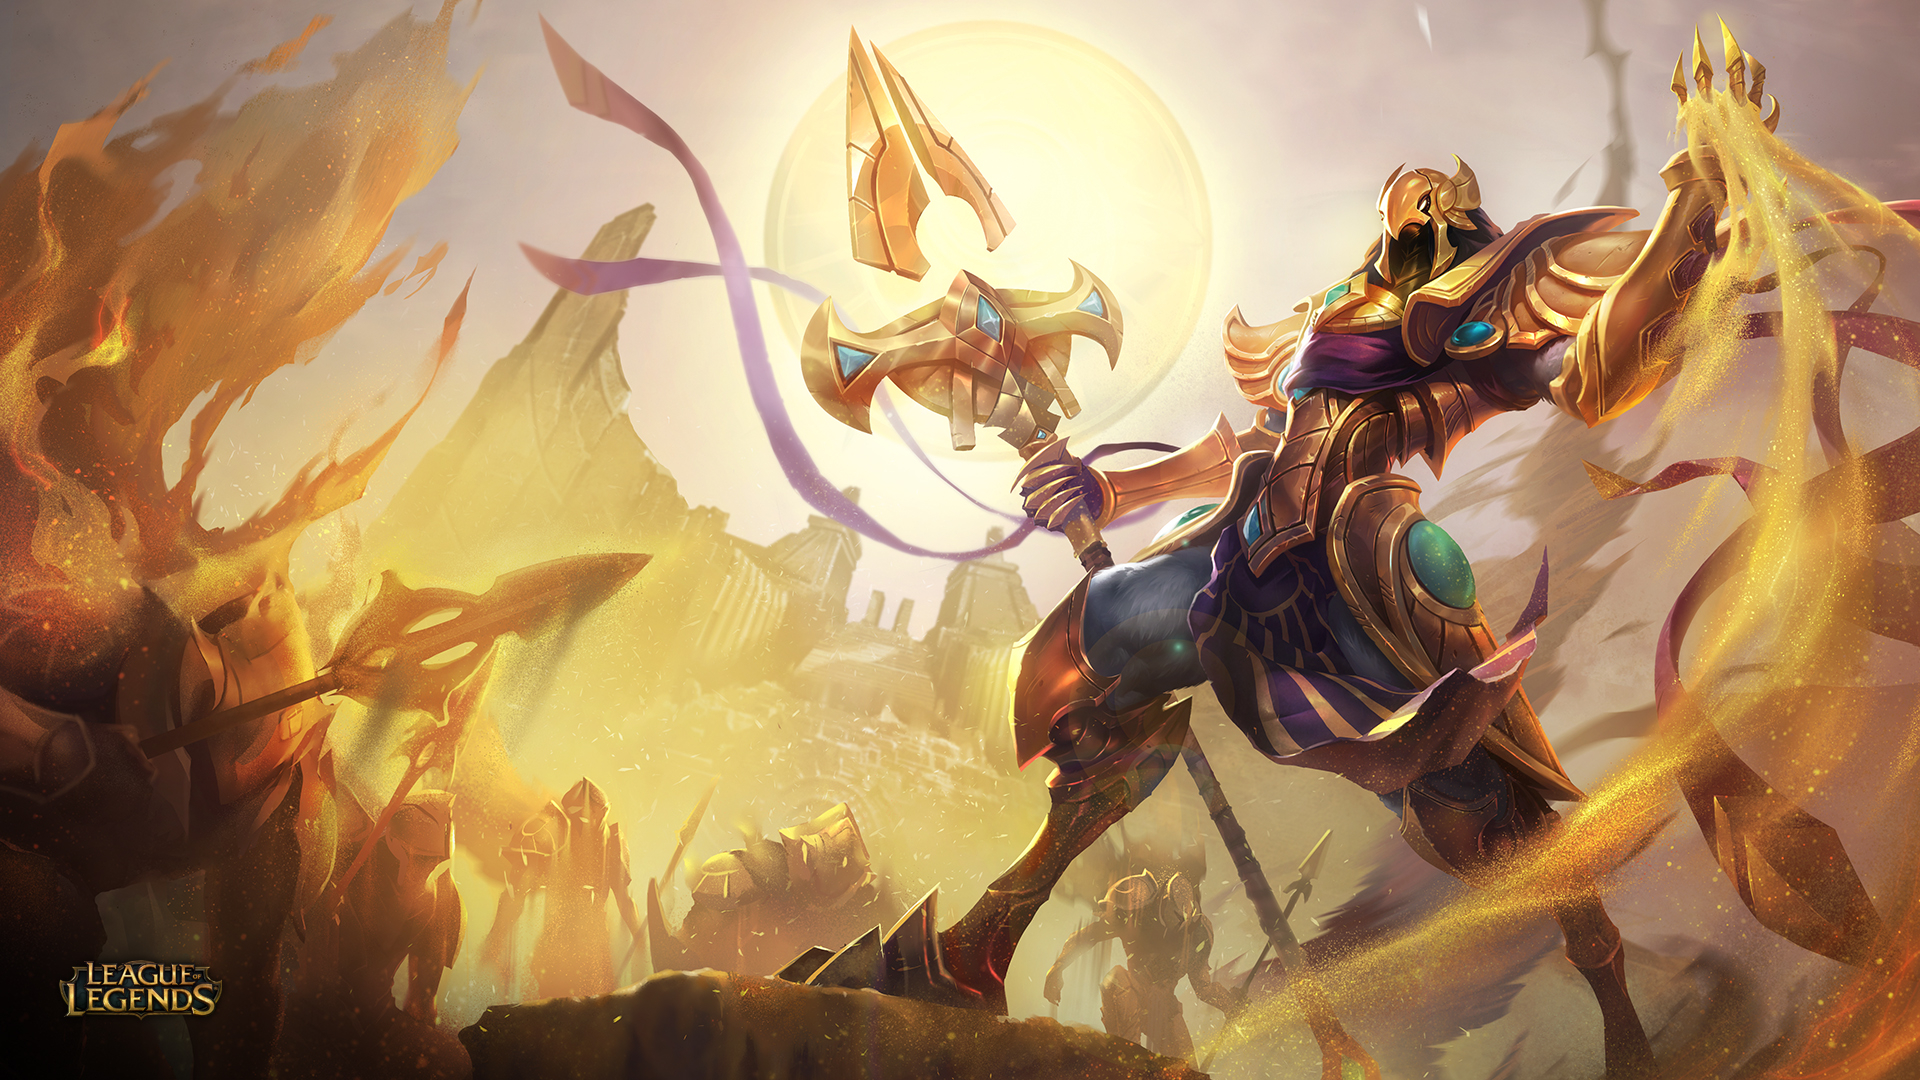 Next League of Legends is Azir, Emperor of Sands, mage who controls army - Neoseeker